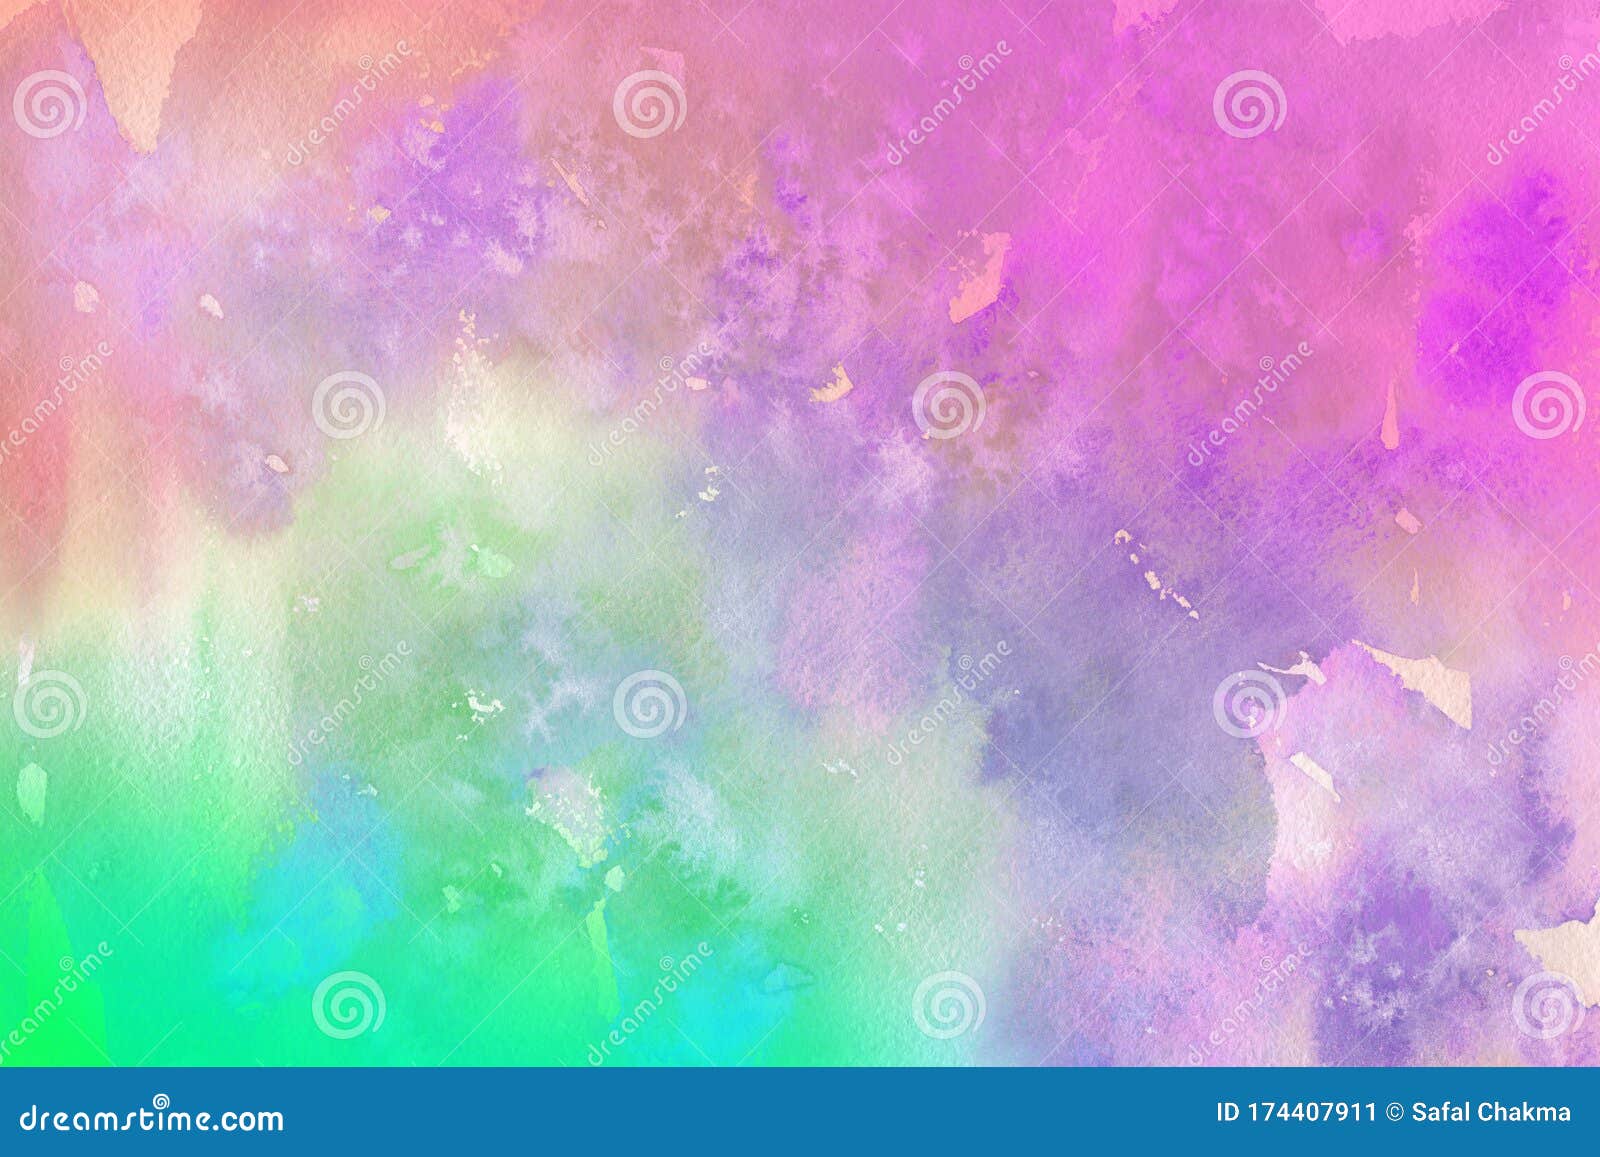 High Resolution Colorful Textured Background. Stock Image - Image of ...